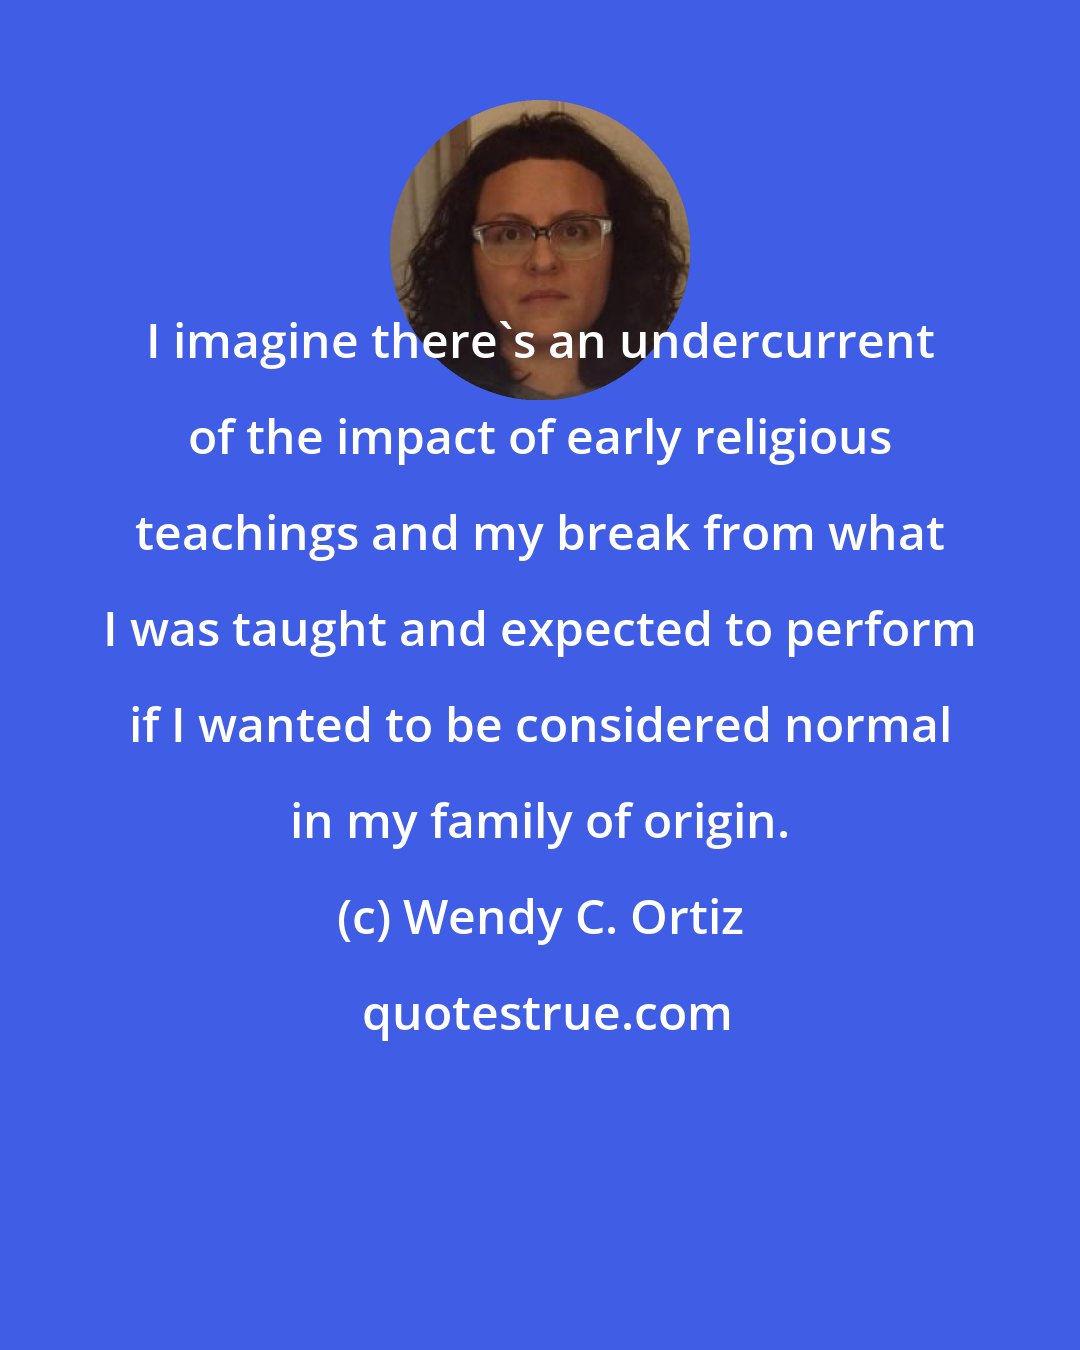 Wendy C. Ortiz: I imagine there's an undercurrent of the impact of early religious teachings and my break from what I was taught and expected to perform if I wanted to be considered normal in my family of origin.